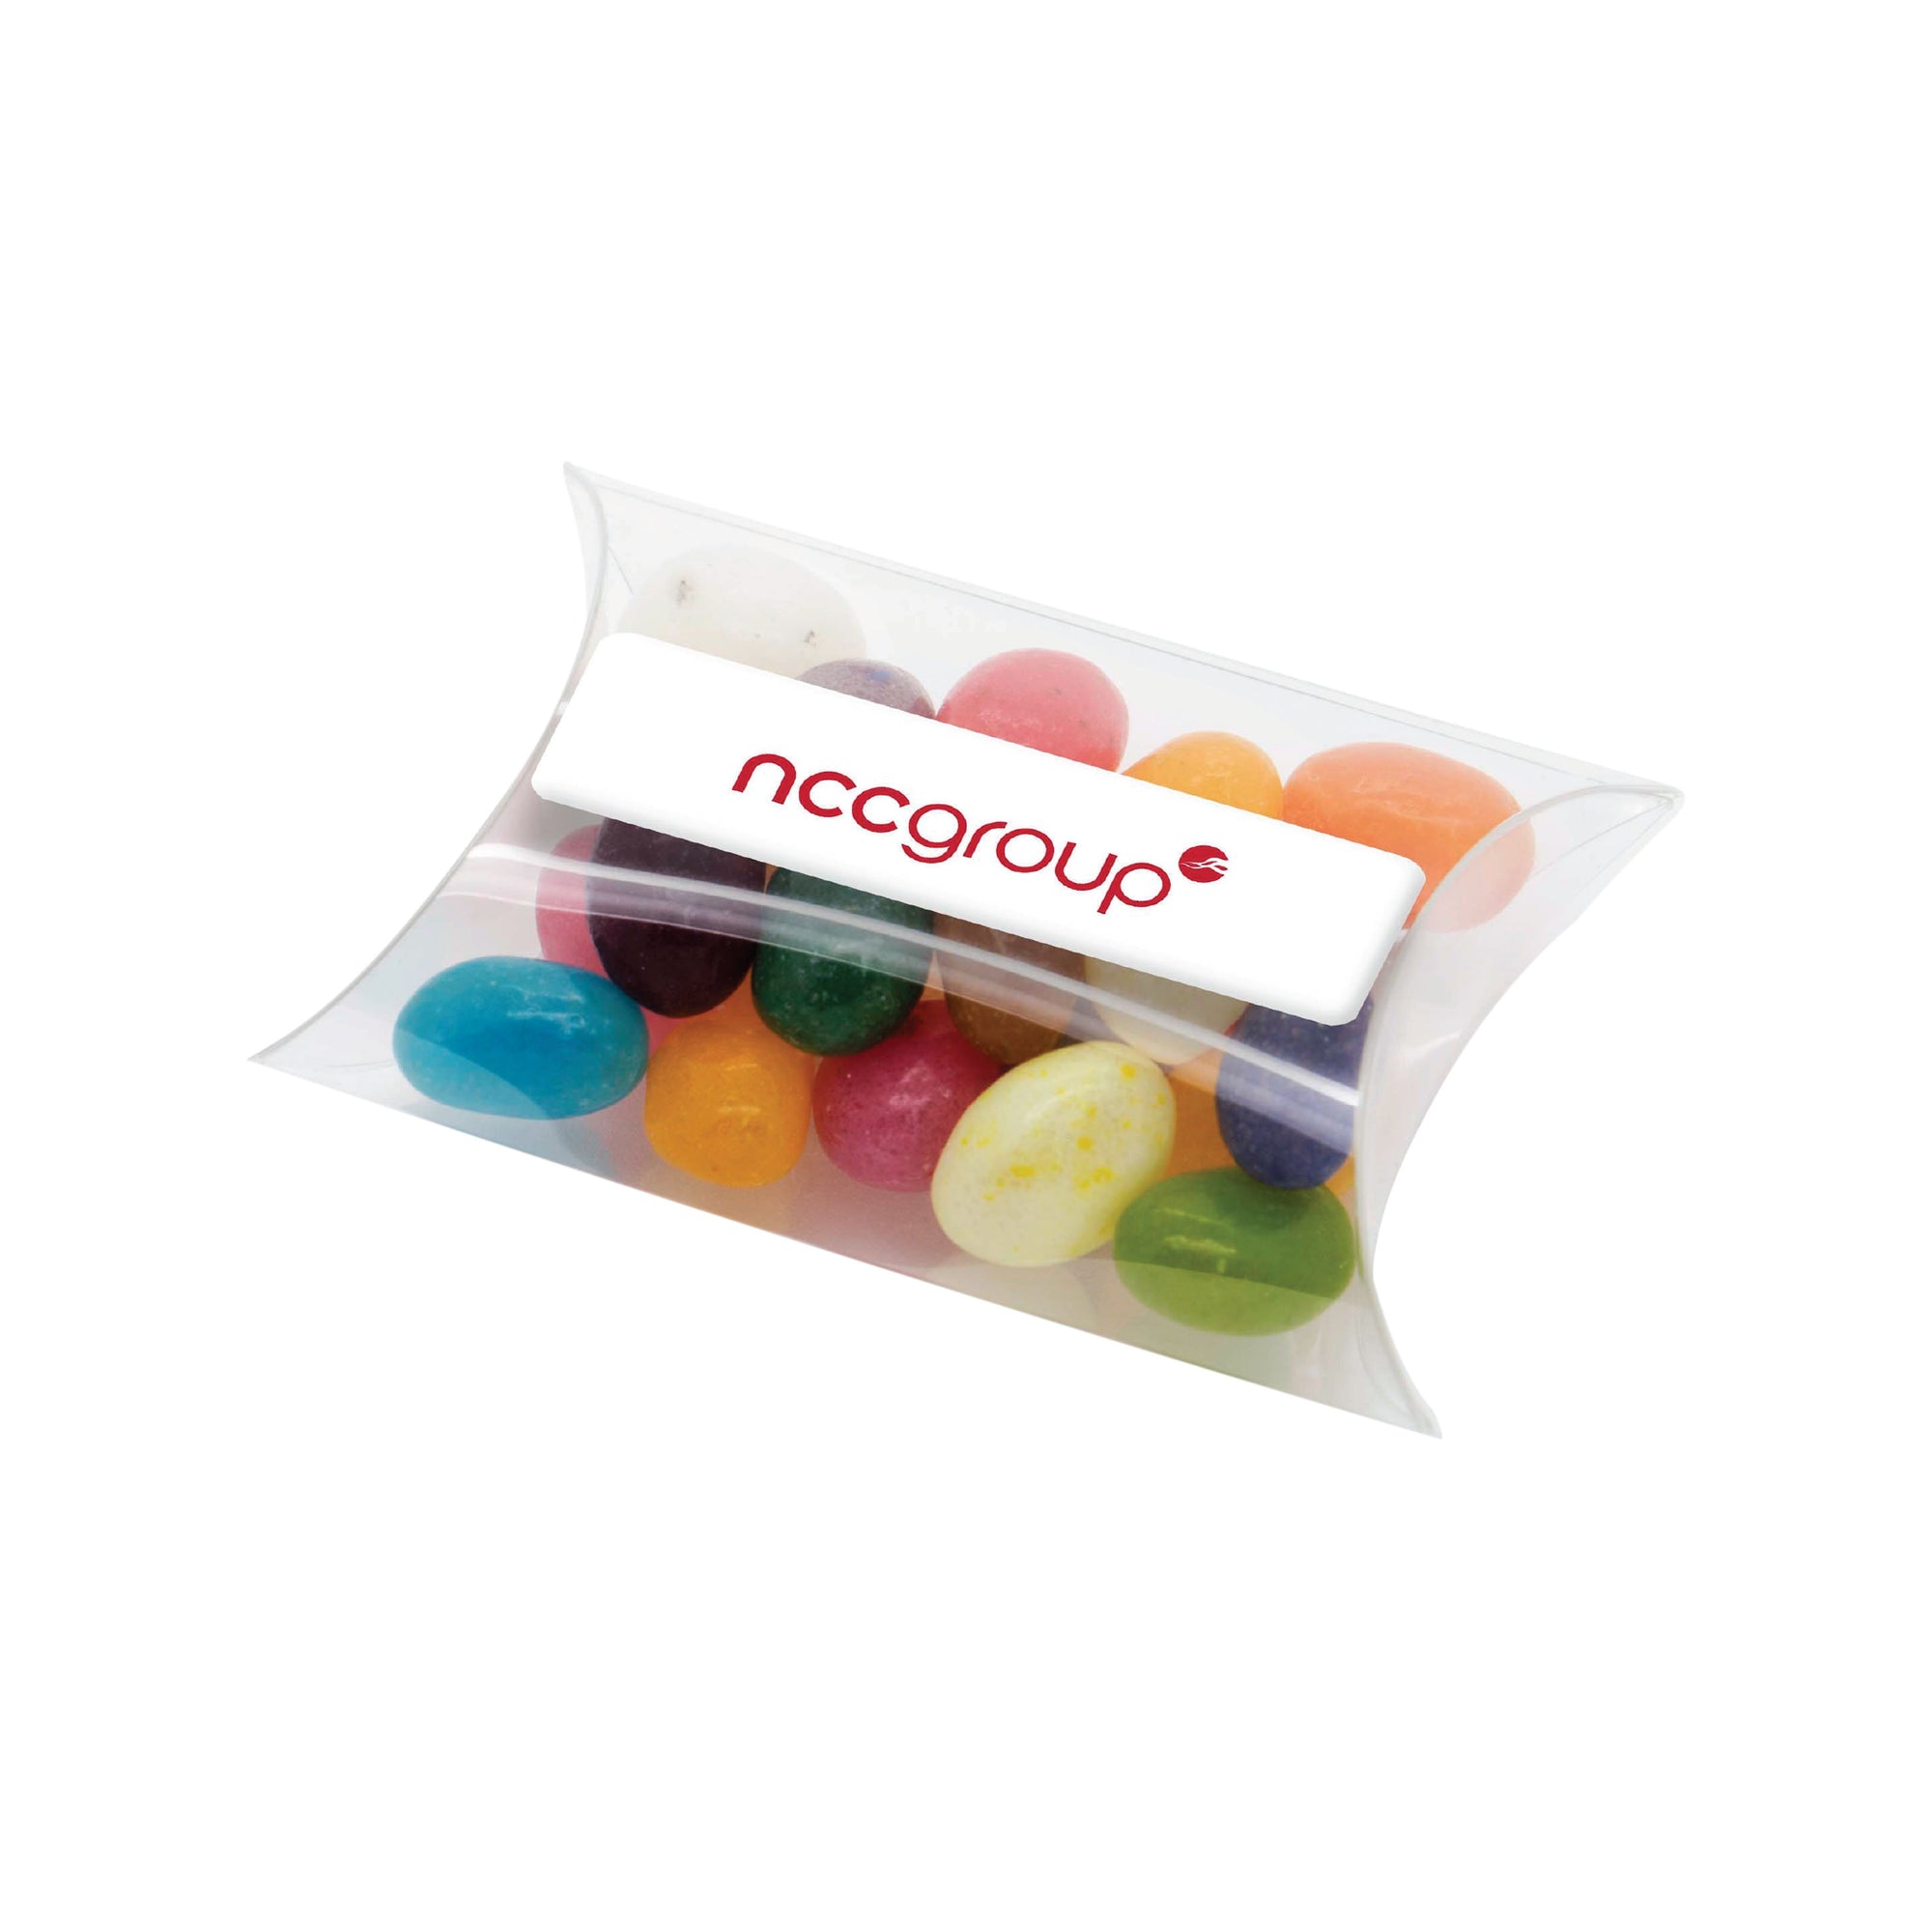 Branded Promotional Pouch of Jelly Beans (£0.91 +VAT) NCC Group From Concept Incentives.